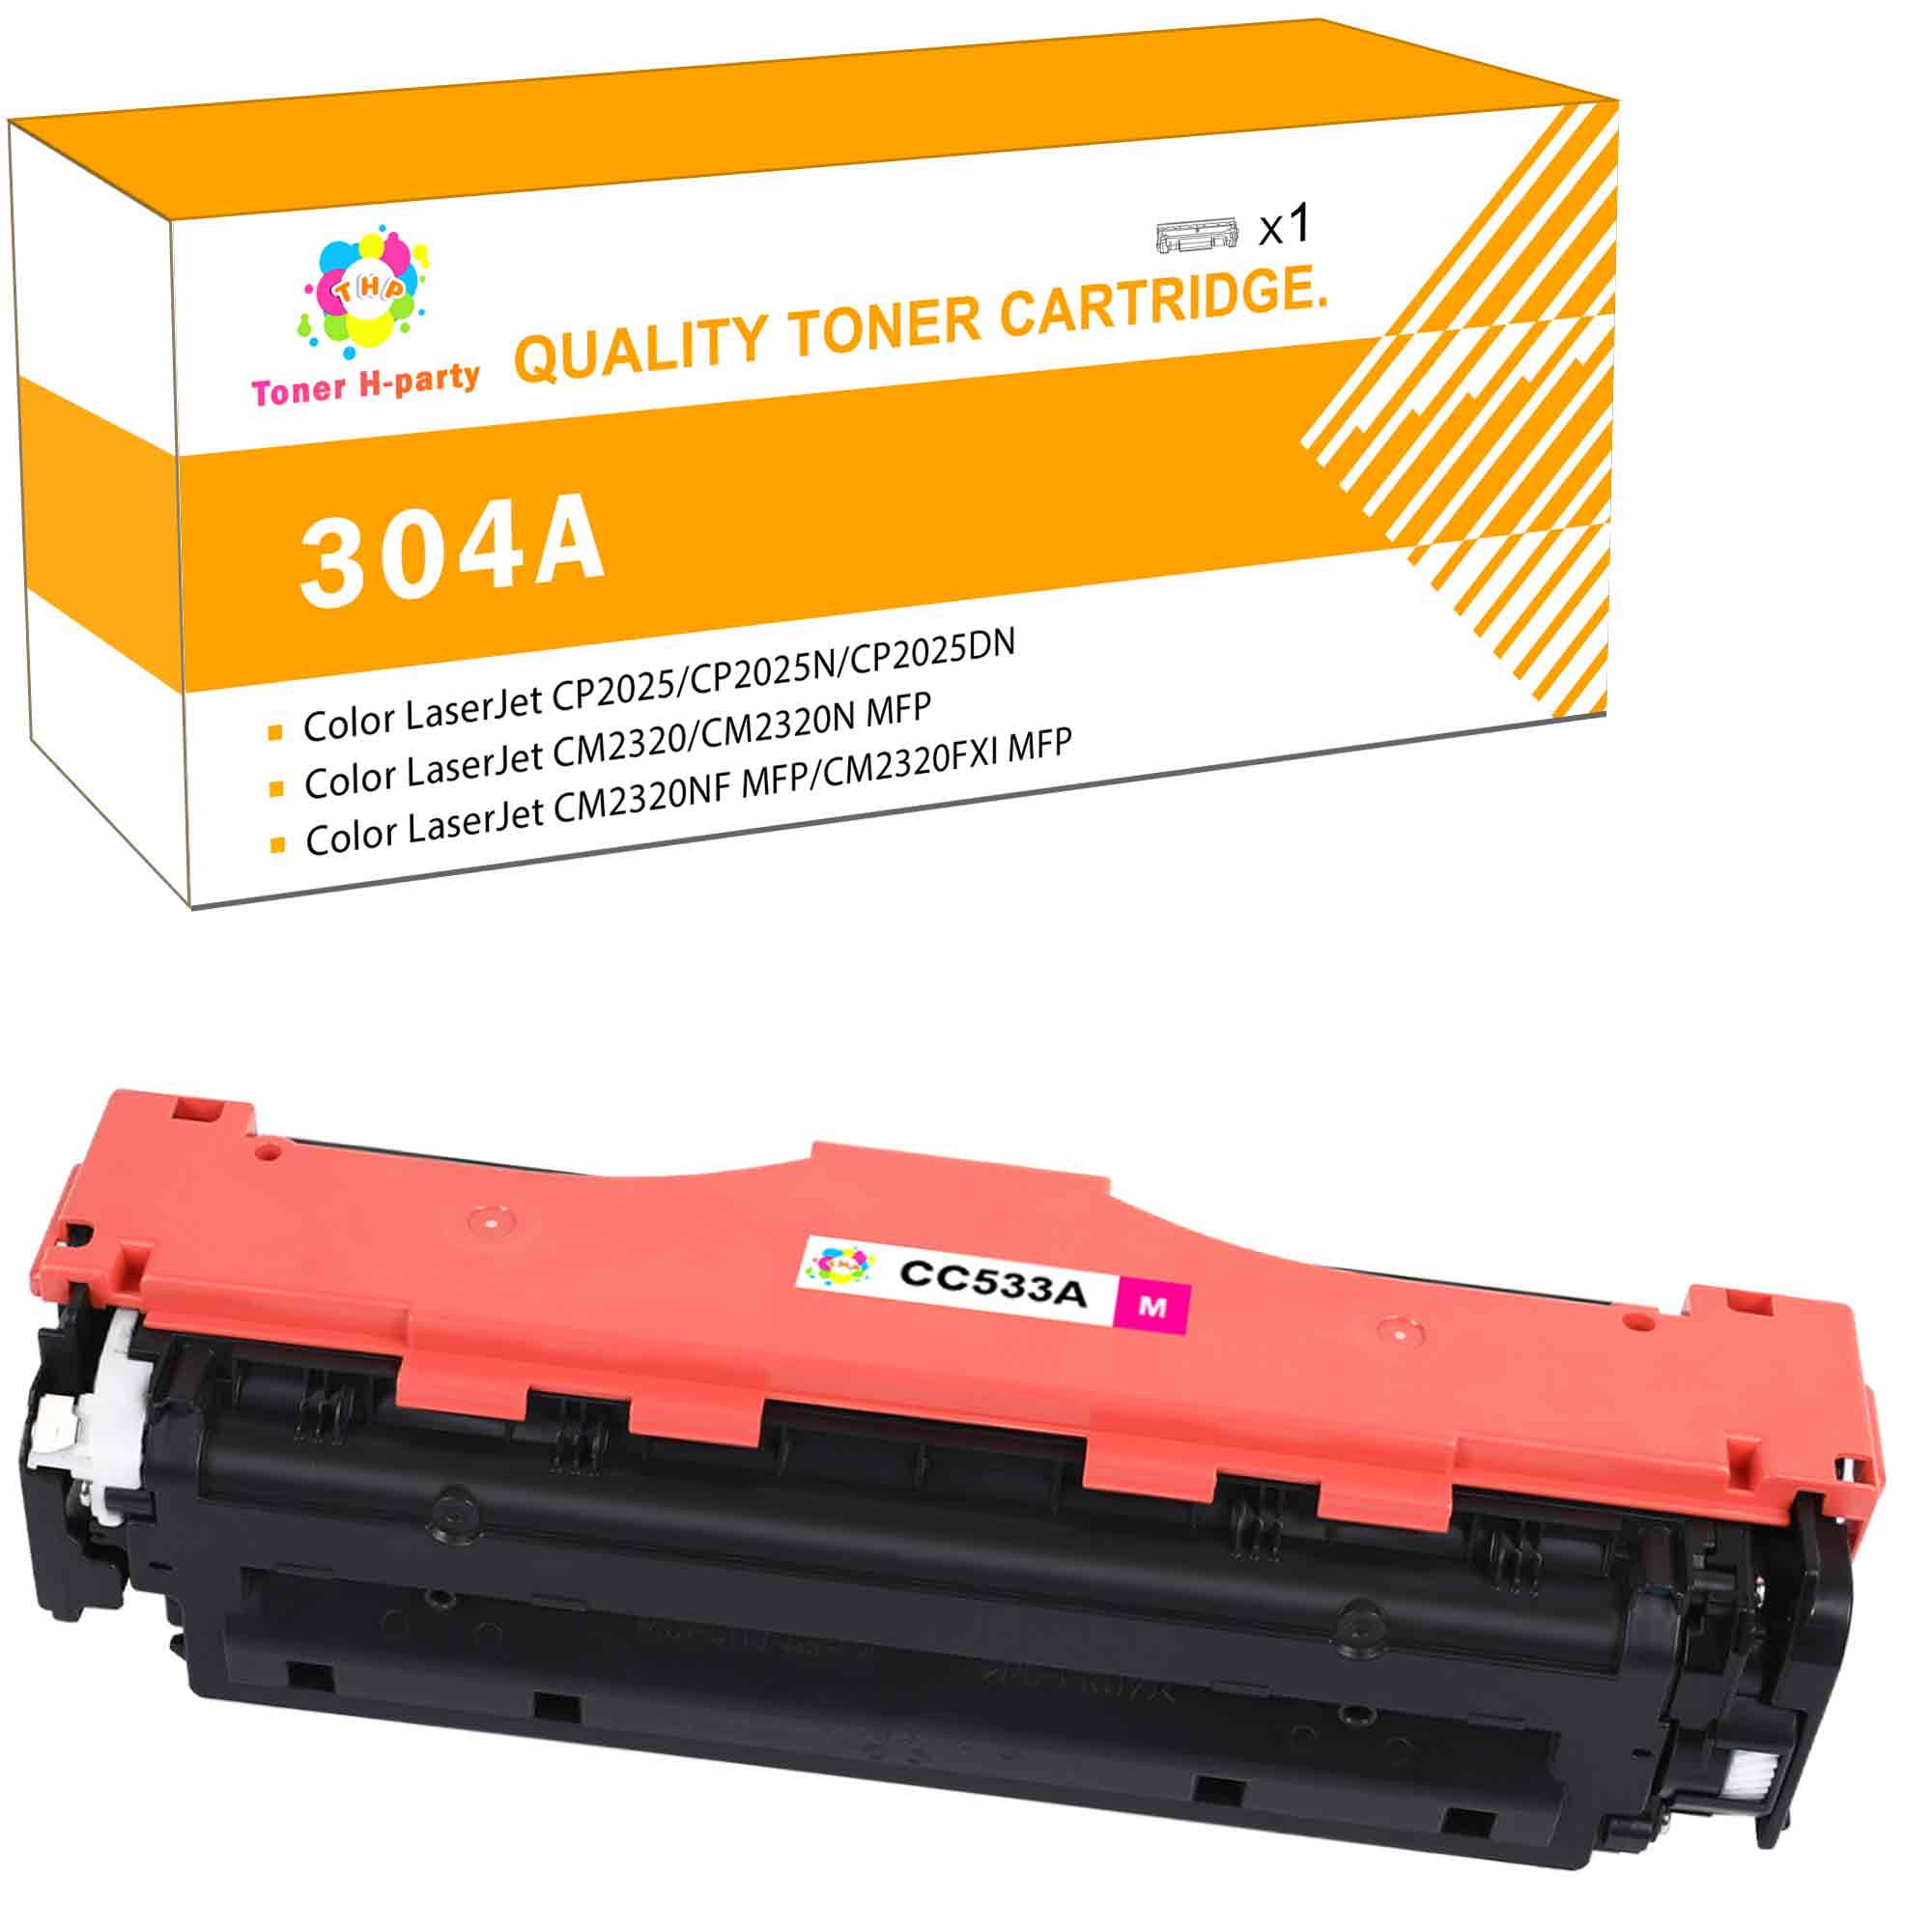 Toner H-Party 304A Toner Cartridge Replacement for CC530A for Use with Color LaserJet CP2025 CP2025N CP2025DN, CM2320 CM2320N-MFP CM2320NF CM2320FXI-MFP (Black,1-Pack) - Walmart.com